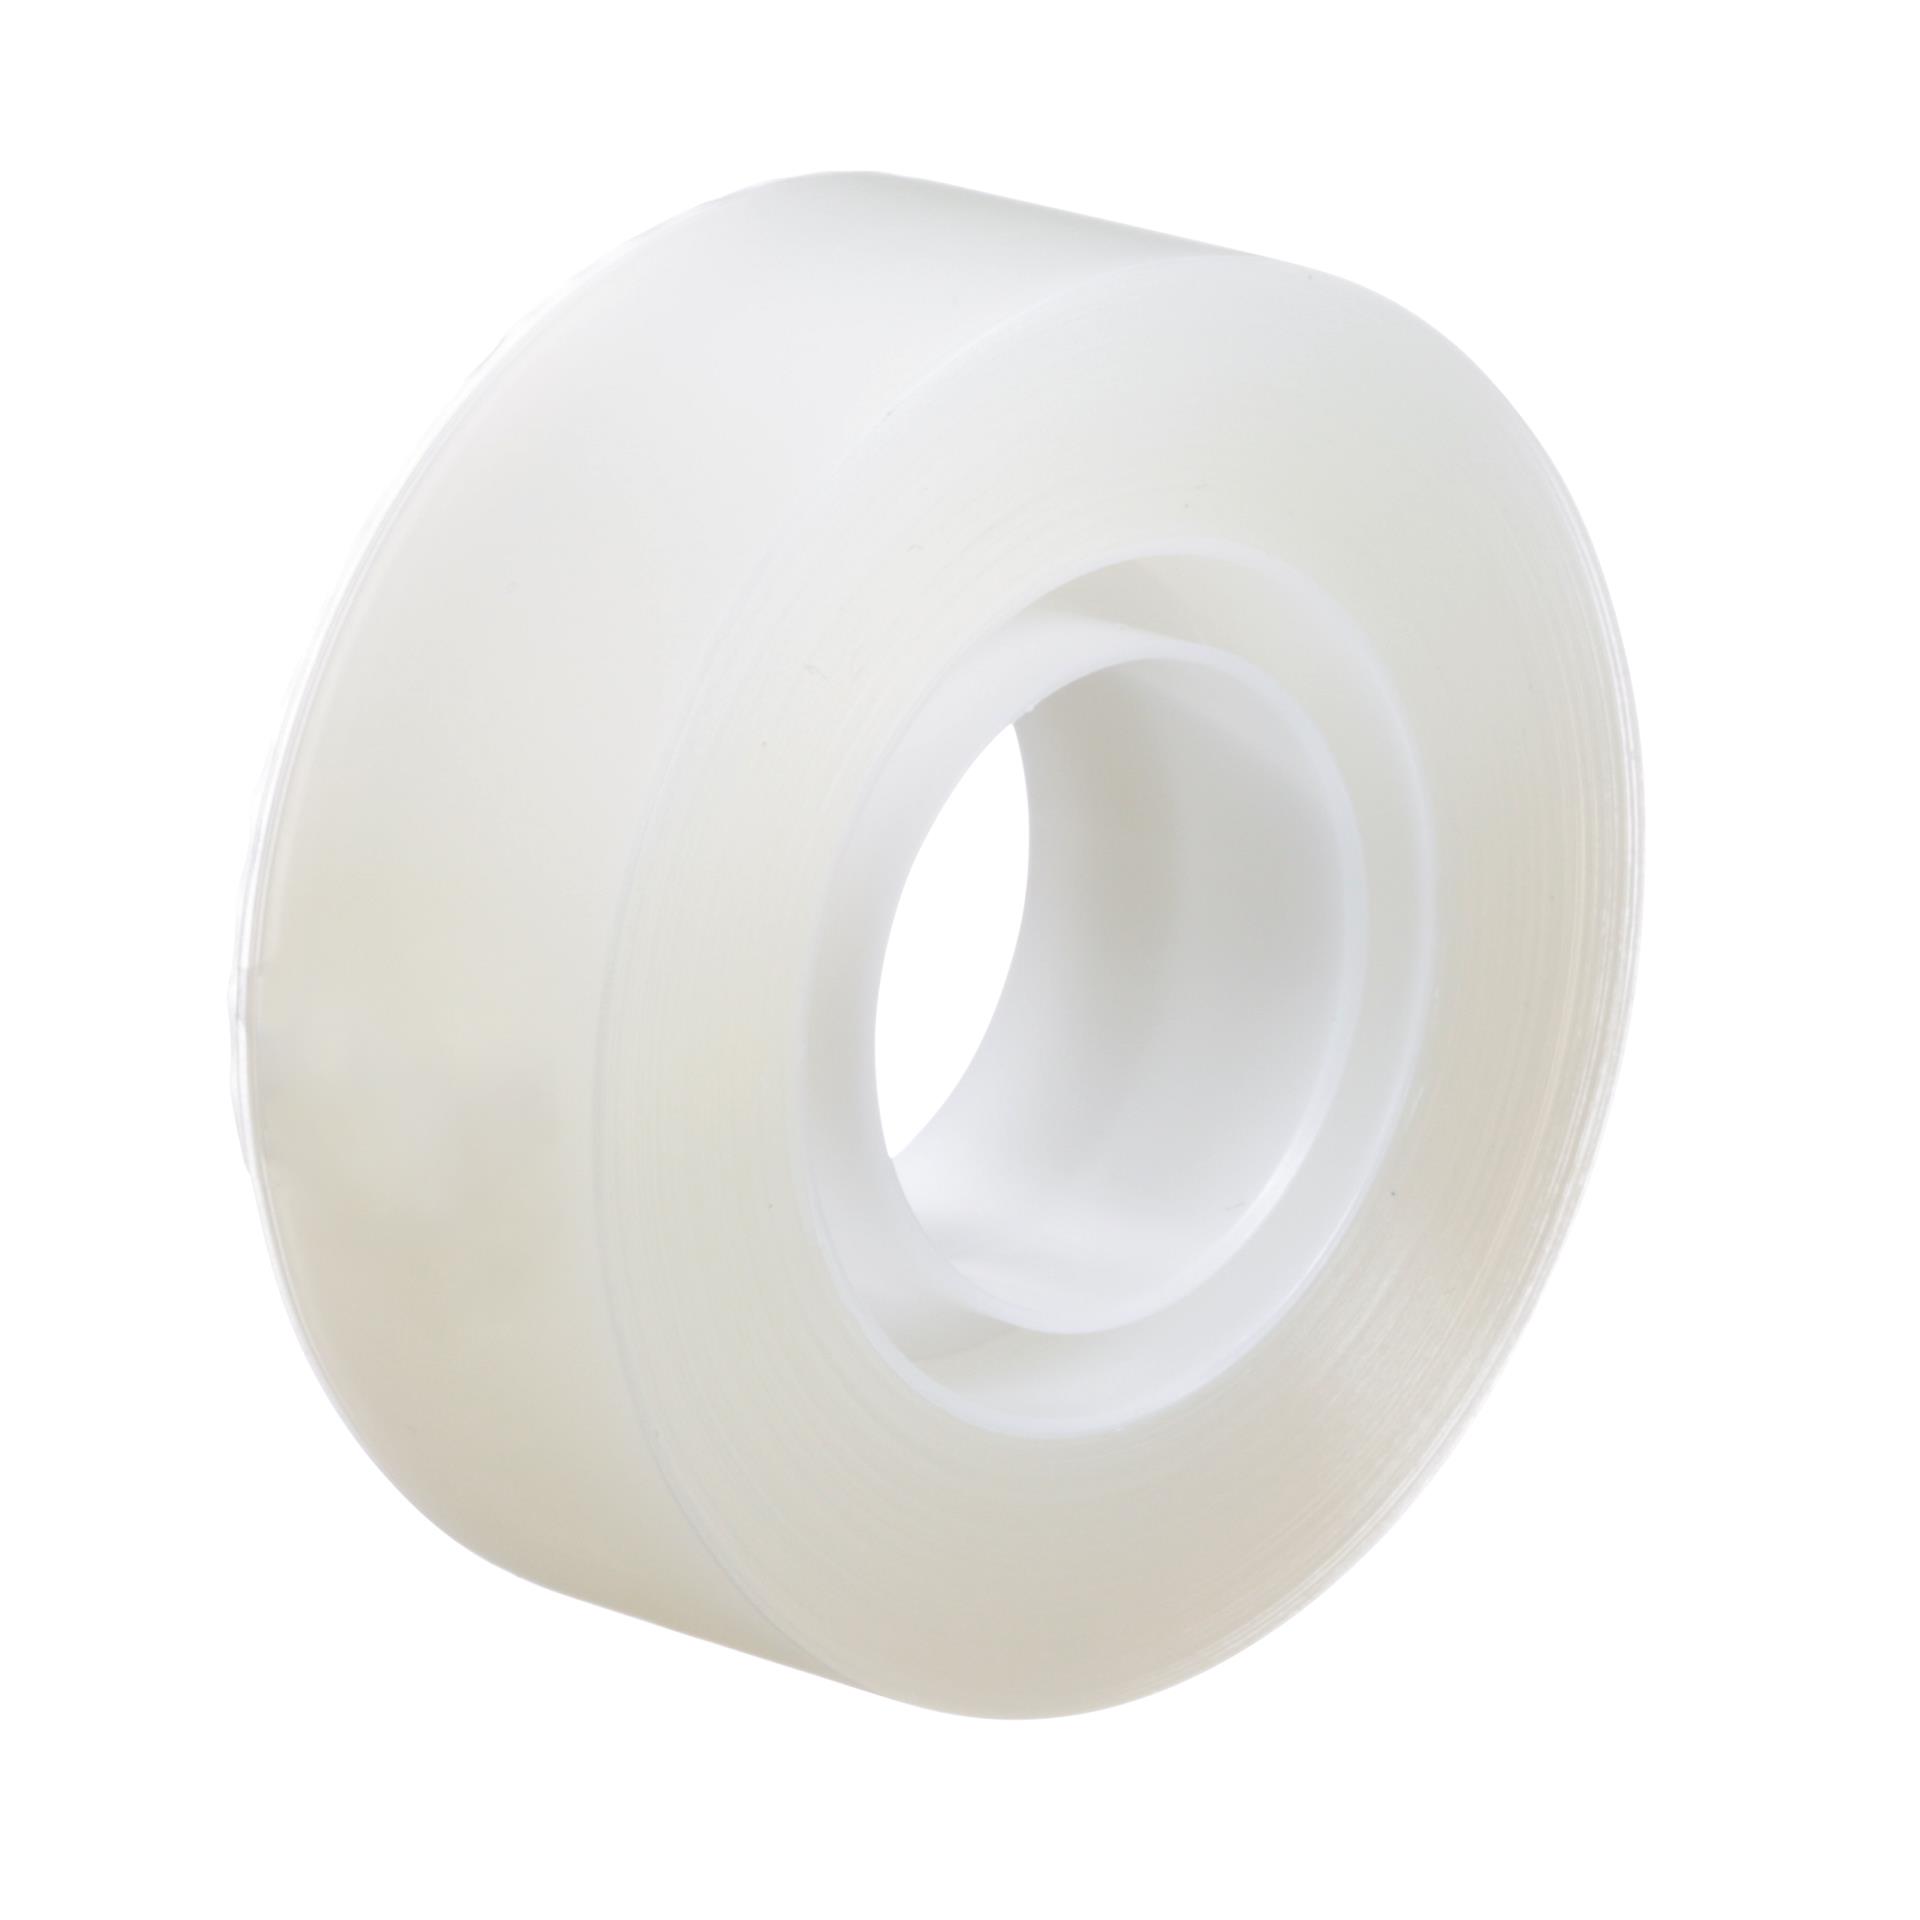 -65 degrees F to 450 degrees F 2 Length 1.5 Width 3M 361 1.5 x 2-100 White Glass Cloth/Silicone Adhesive Electrical Tape Pack of 100 2 Length 1.5 Width 3M 361 1.5 x 2-100 Pack of 100